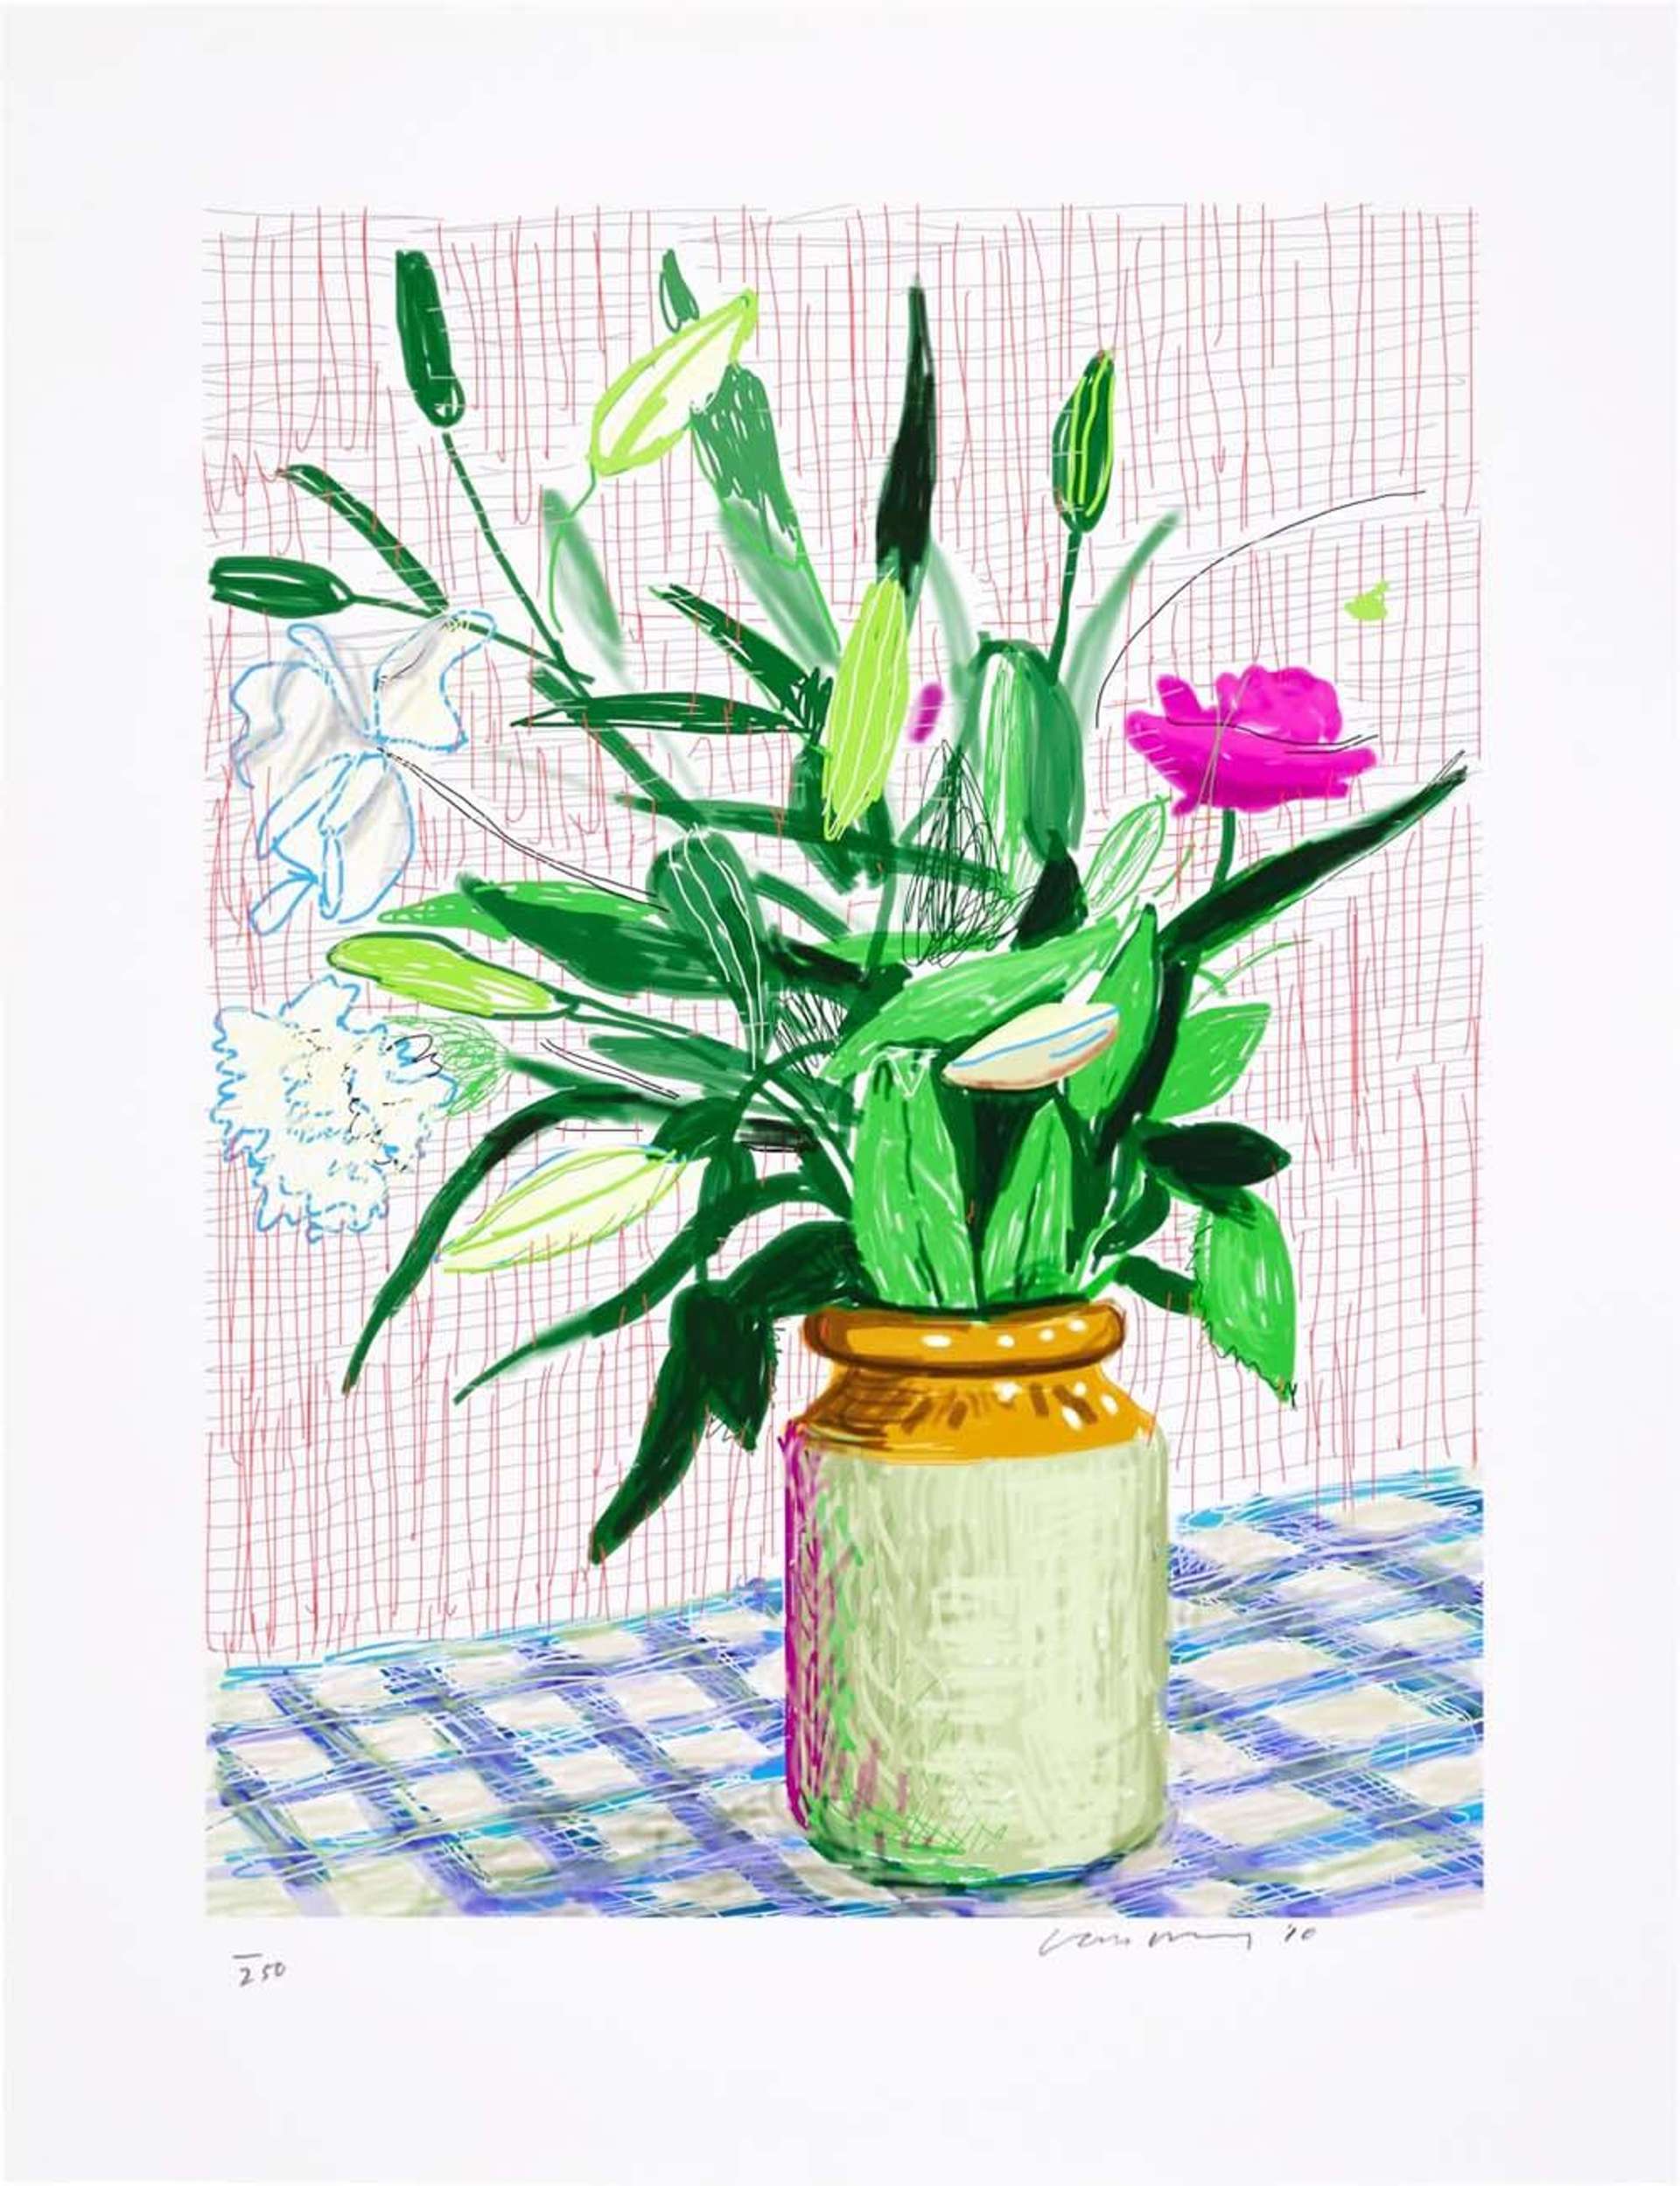  Untitled No.516 by David Hockney made exceptional returns for art investors over the last five years – MyArtBroker